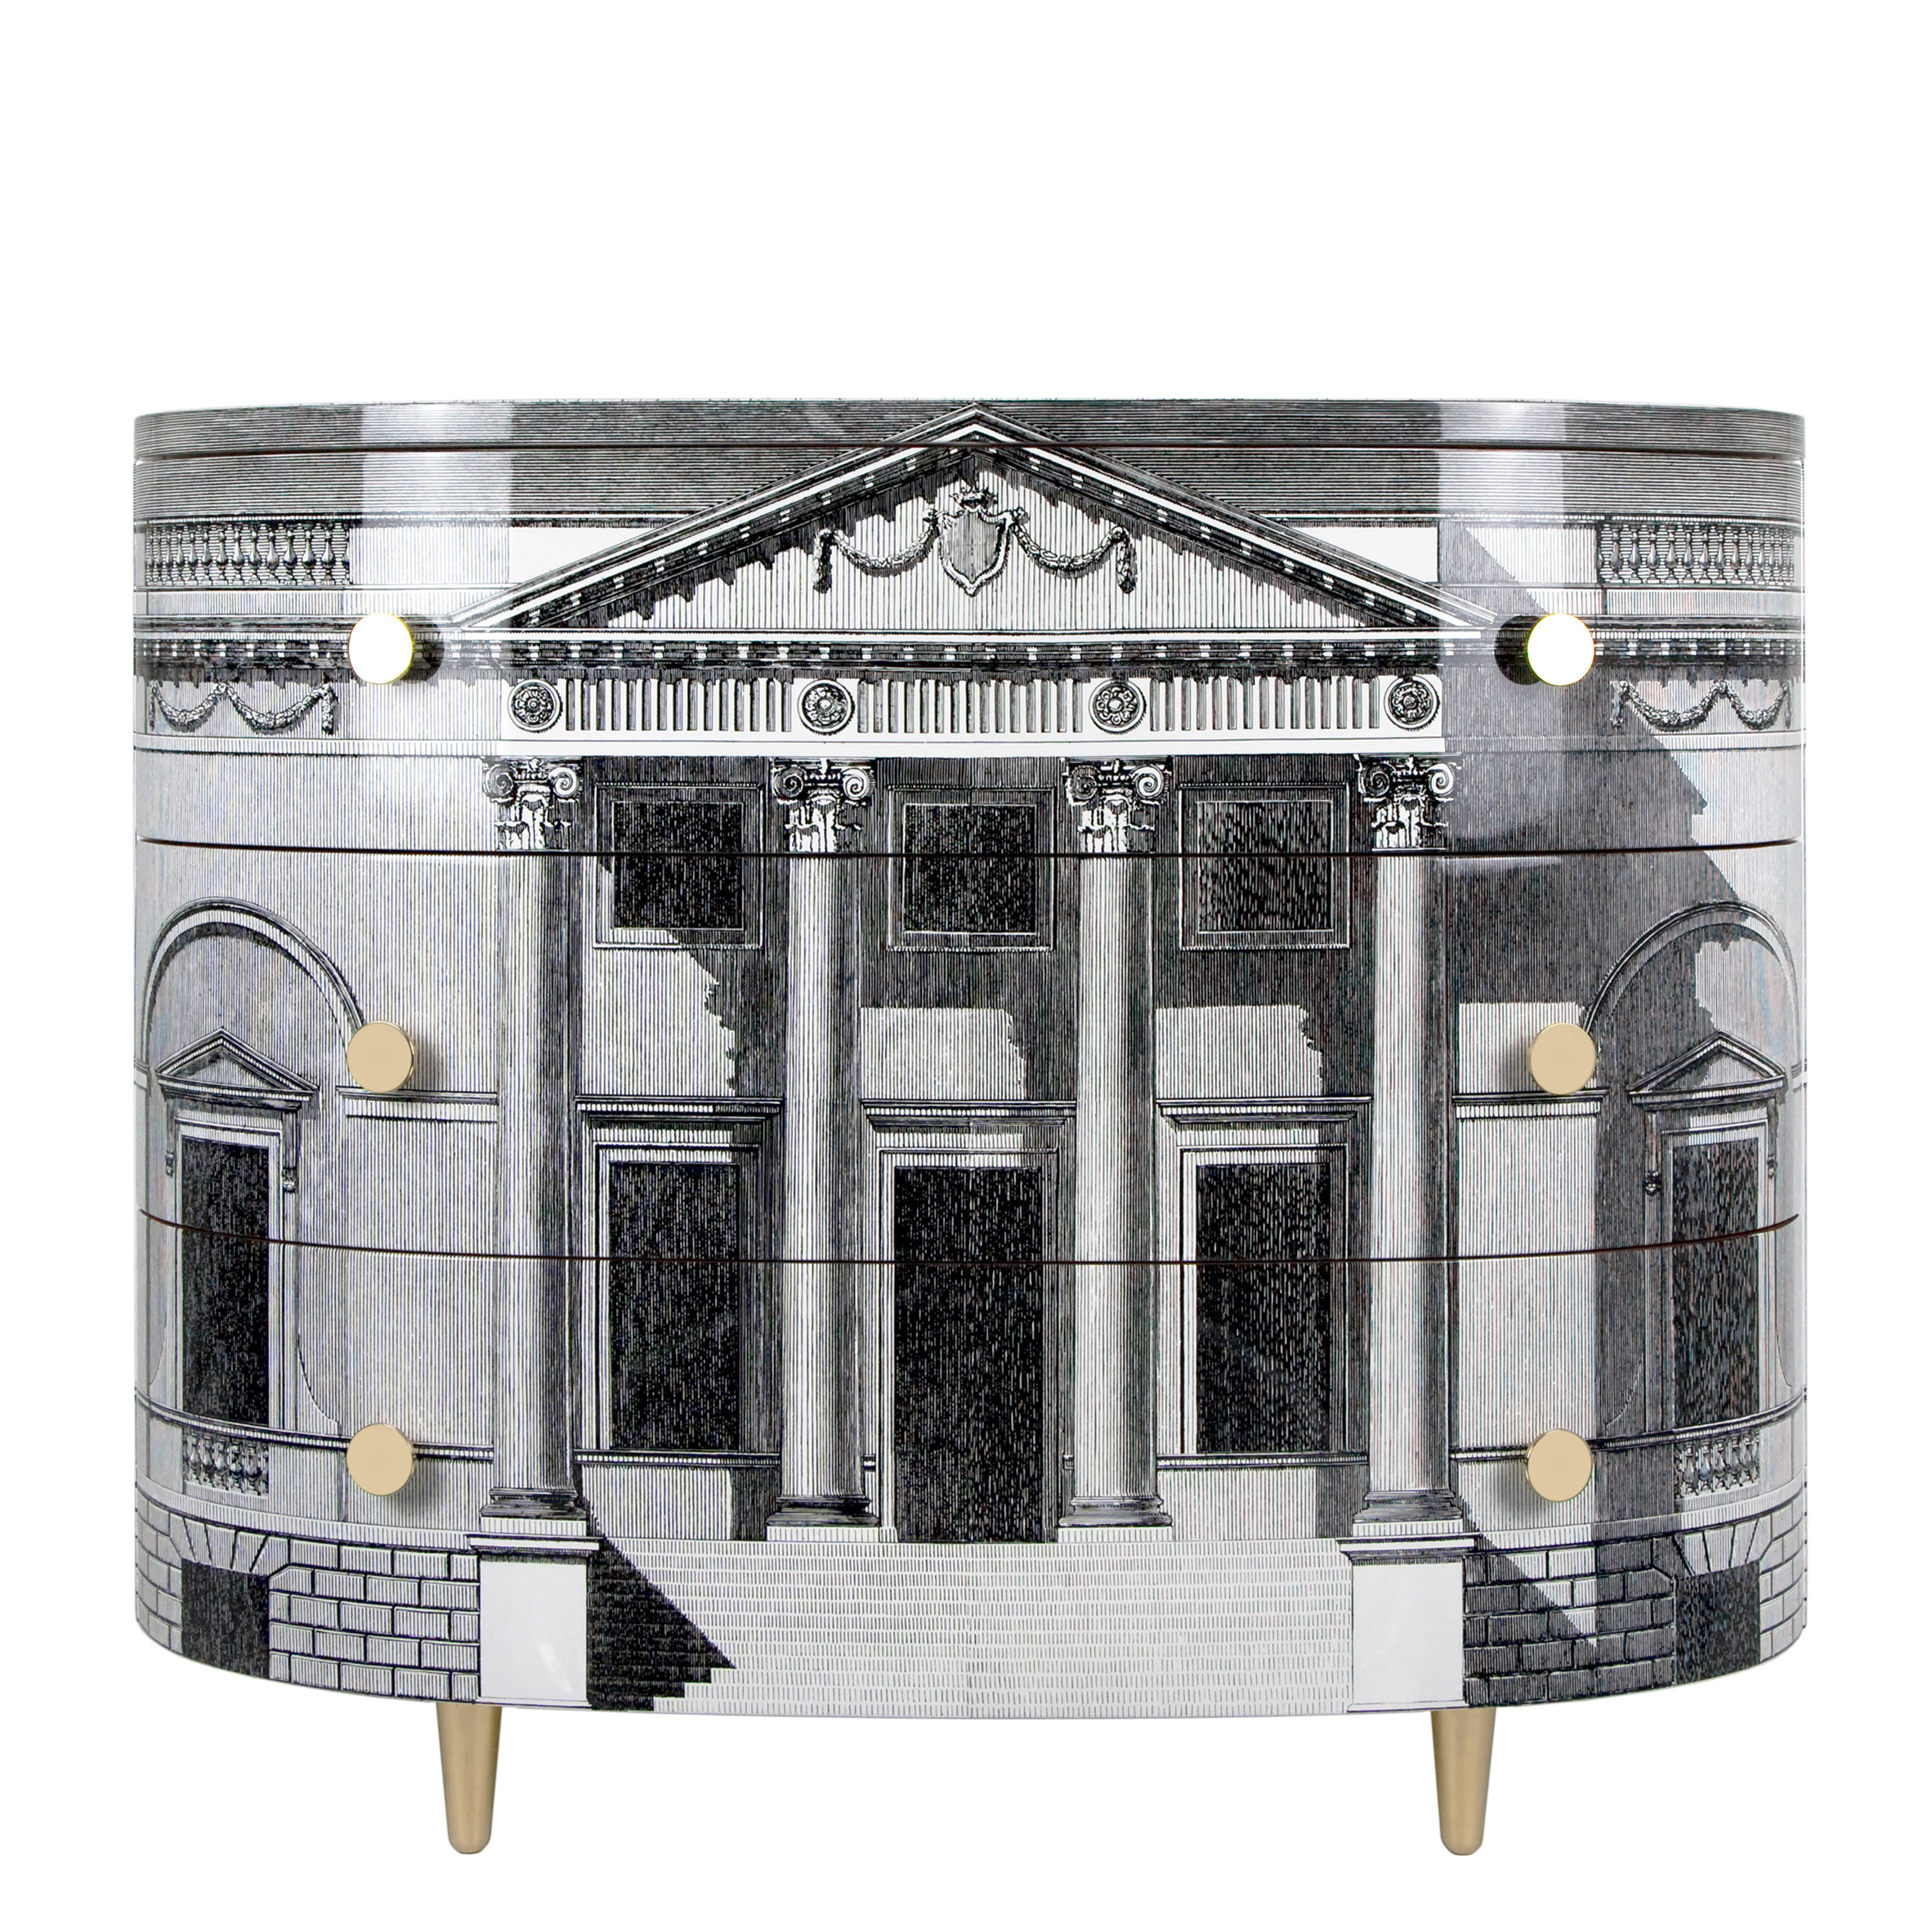 Palladiana curved chest of drawers by Fornasetti